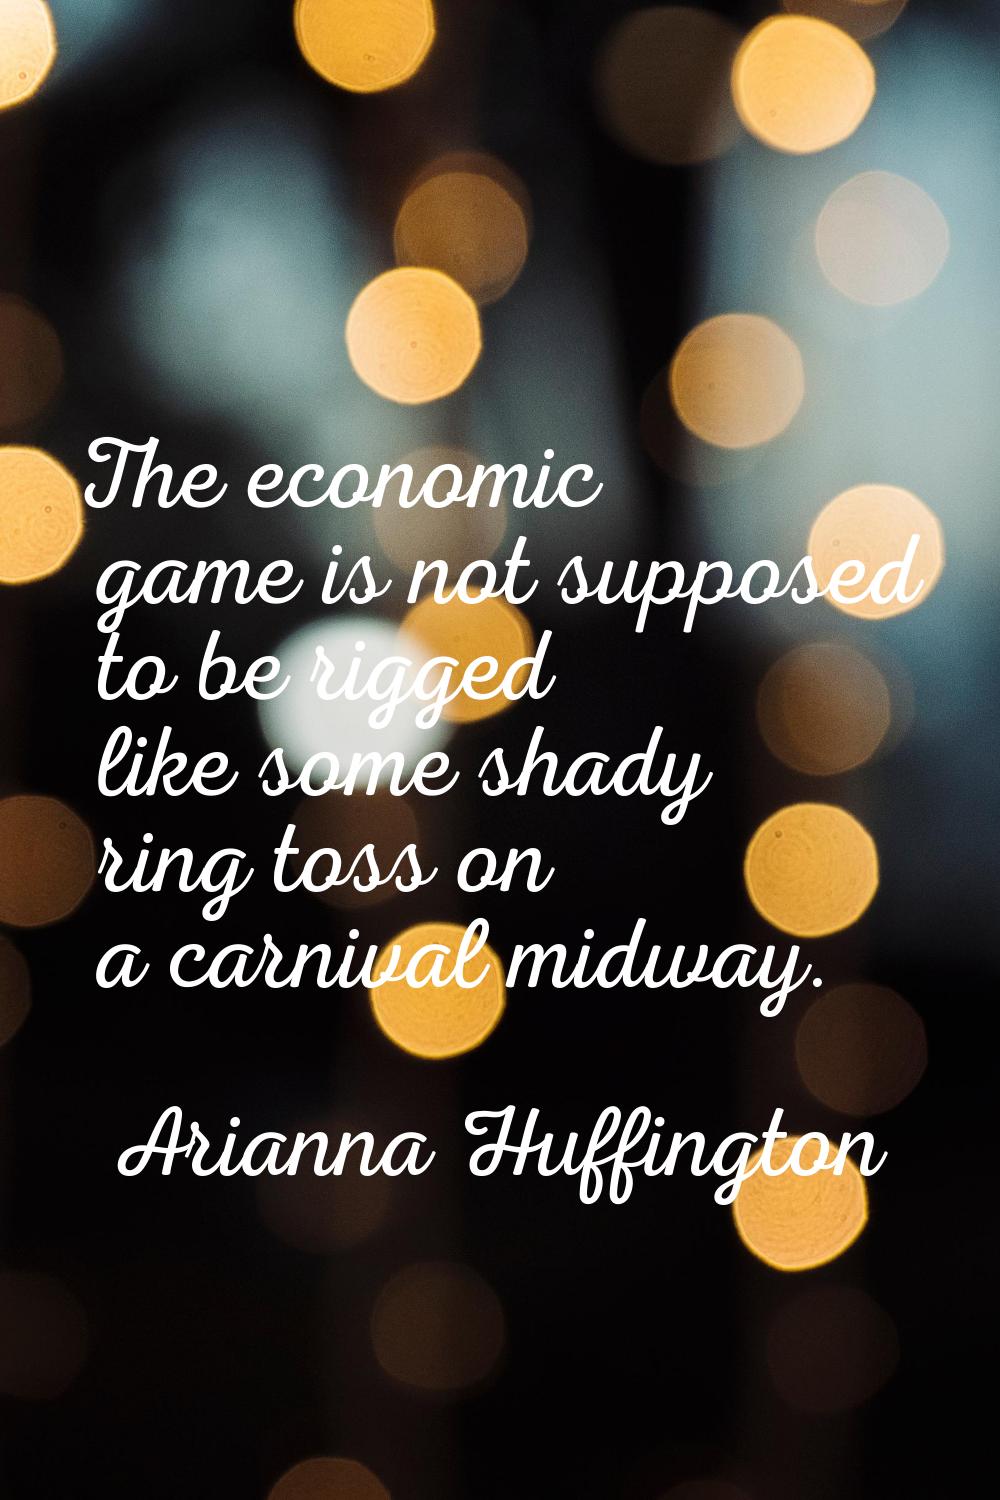 The economic game is not supposed to be rigged like some shady ring toss on a carnival midway.